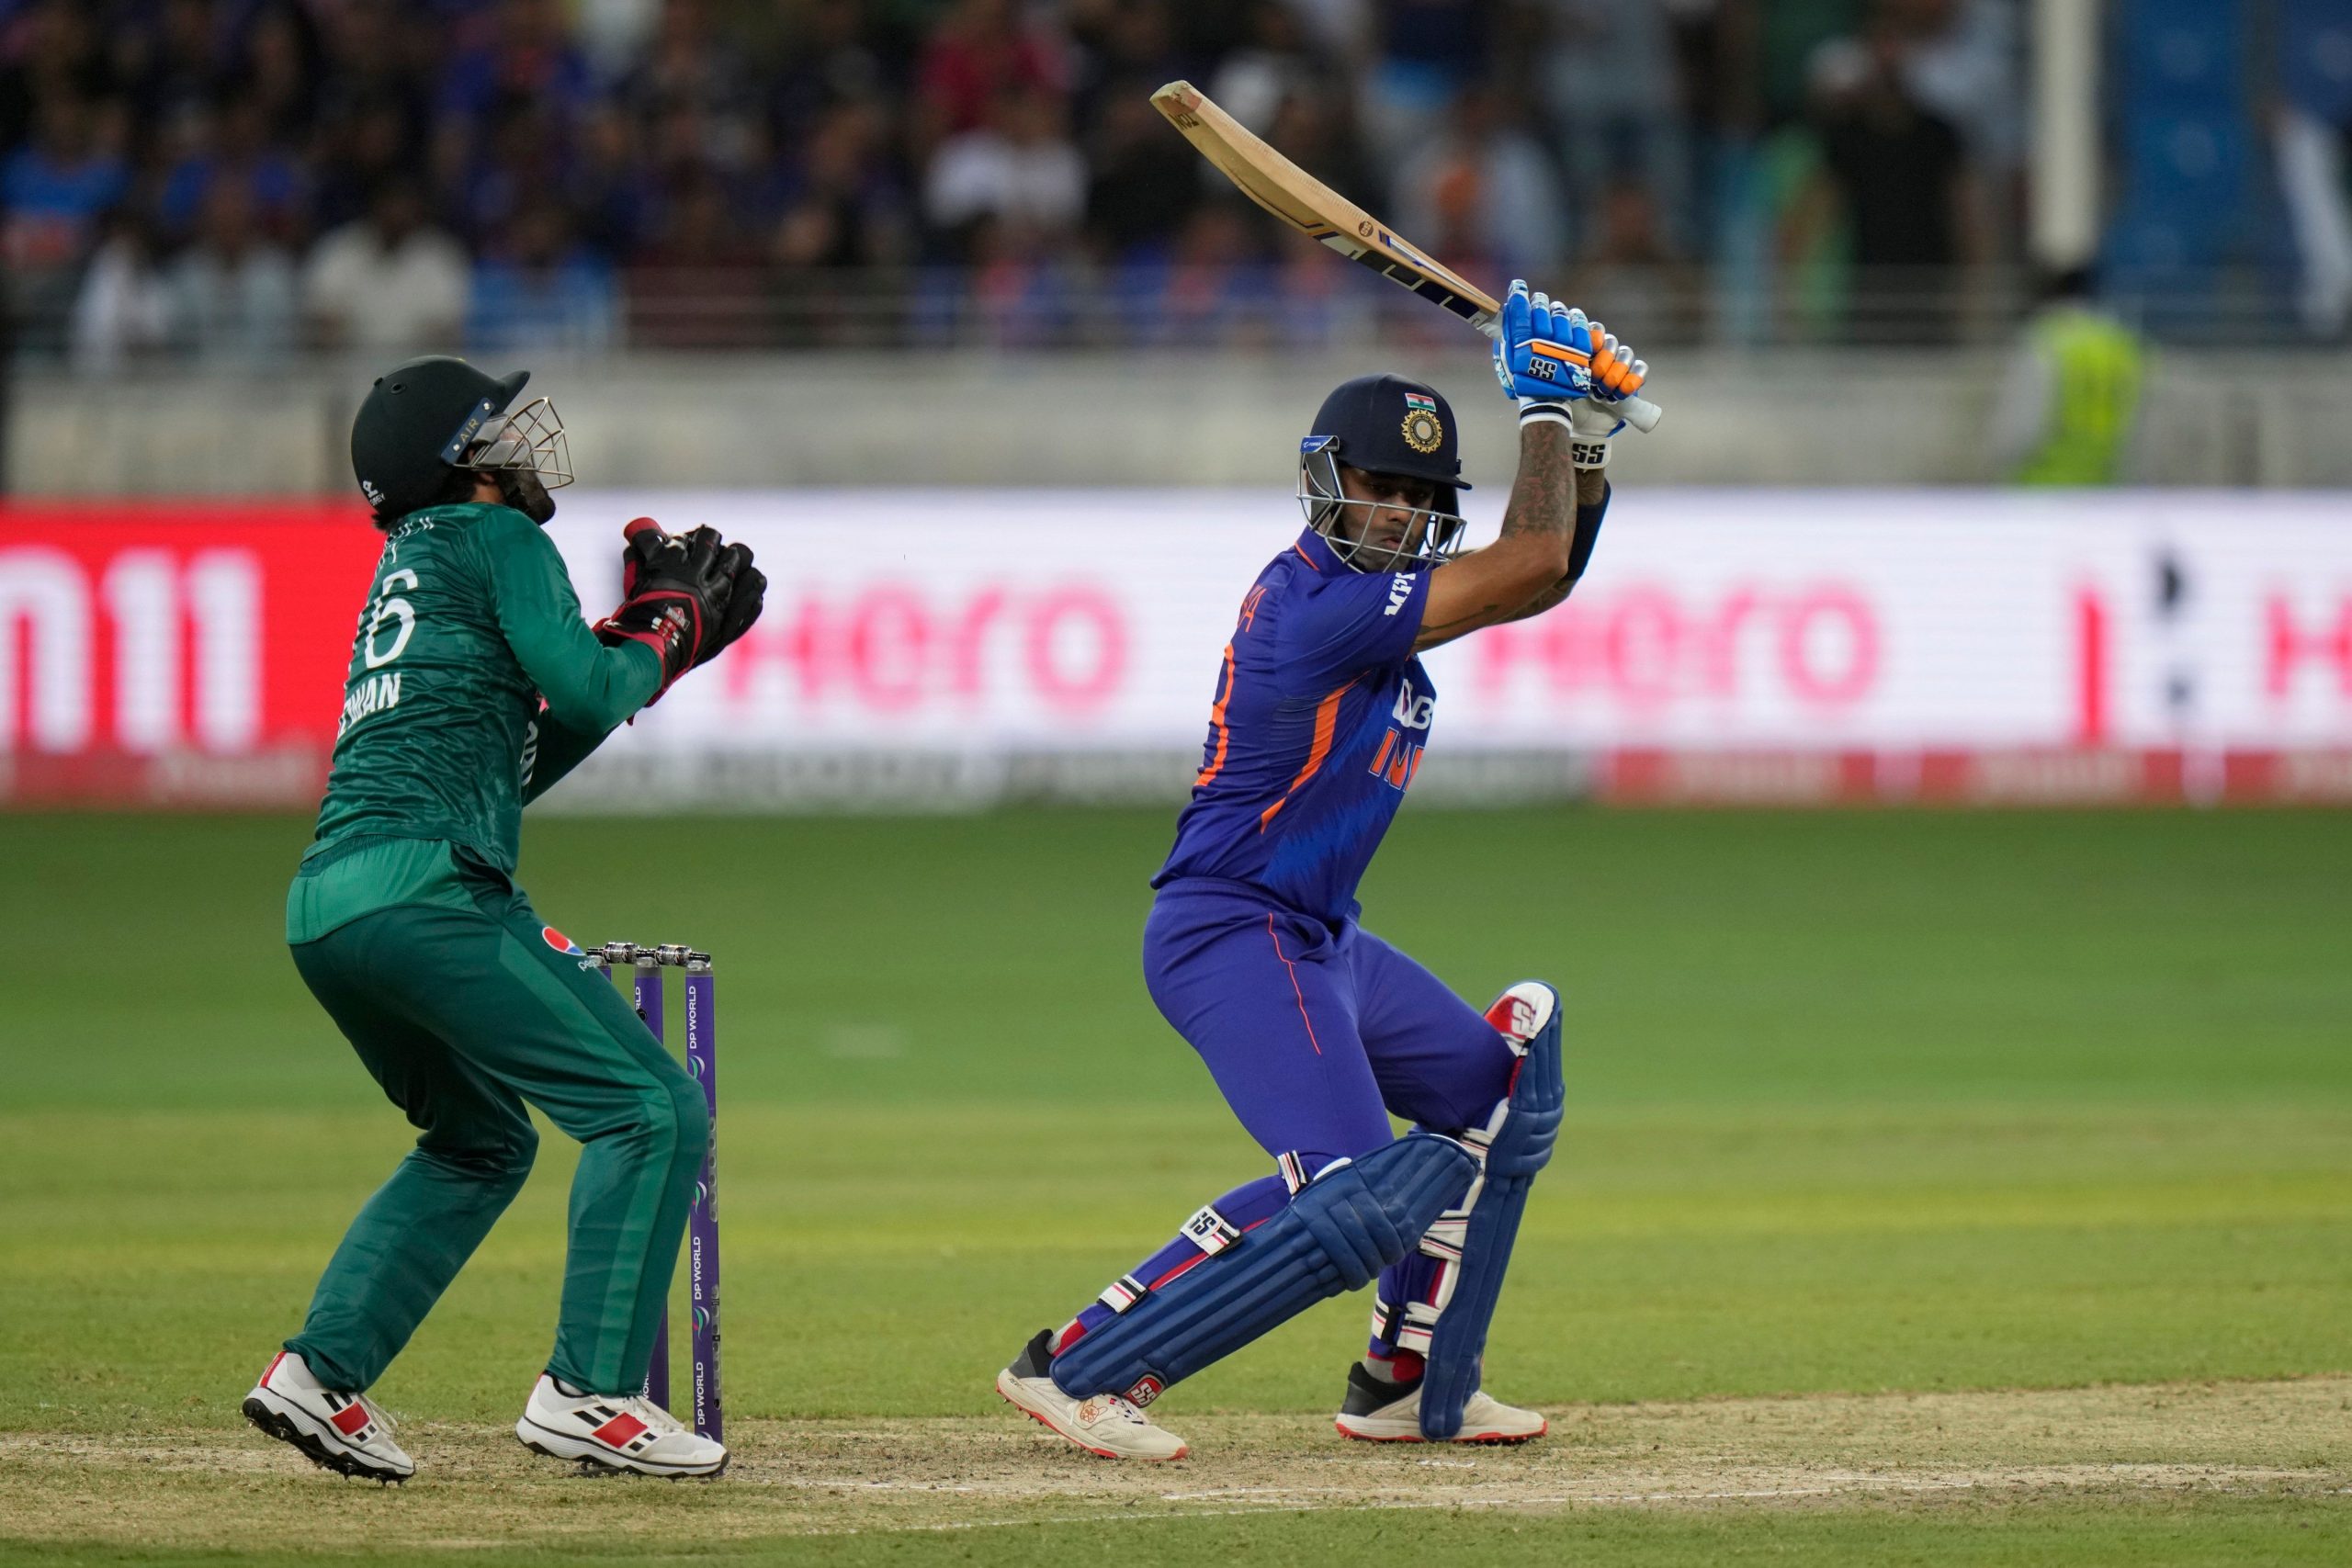 Middle-order trouble? Surya, Pant, Pandya dismissed cheaply vs Pakistan